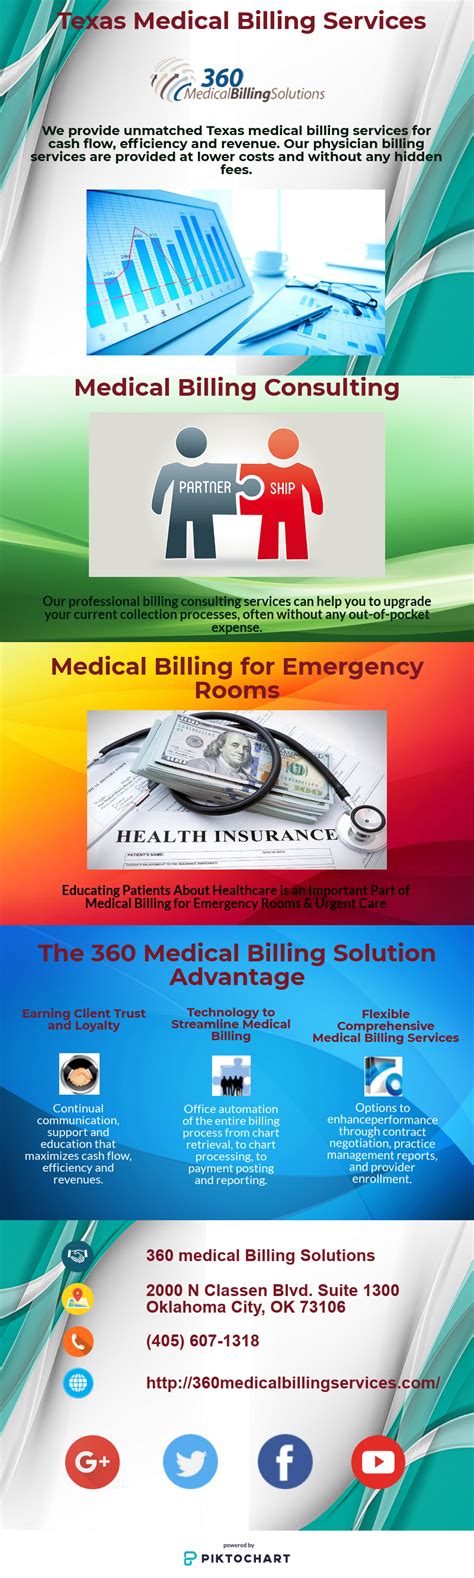 Unfortunately, if you're uninsured, getting medical care can be quite costly. We provide unmatched Texas medical billing services for ...